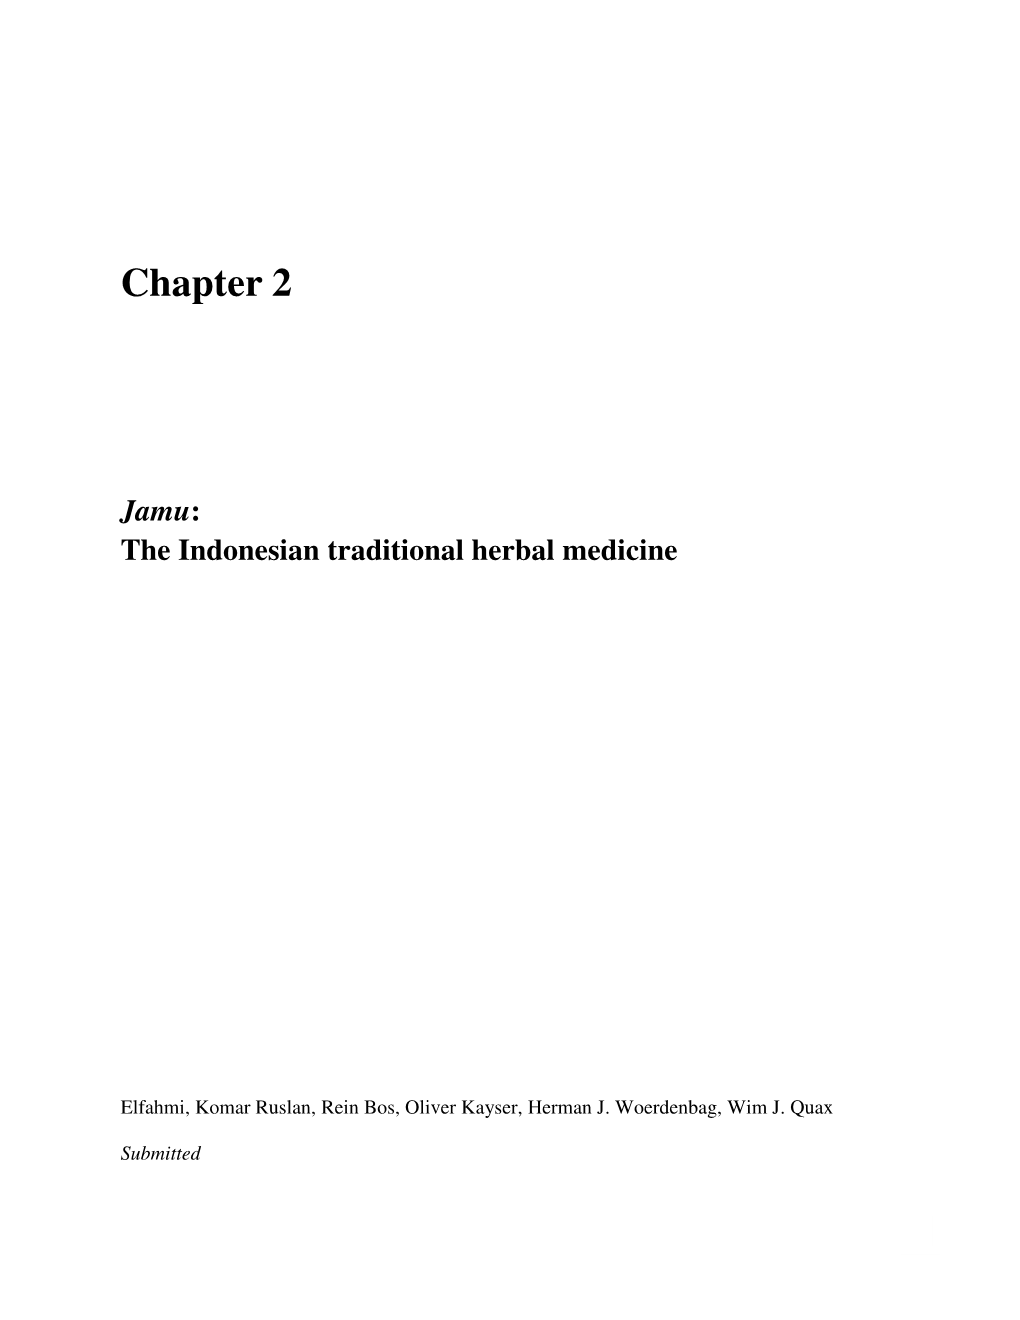 Chapter 2 Jamu: the Indonesian Traditional Herbal Medicine